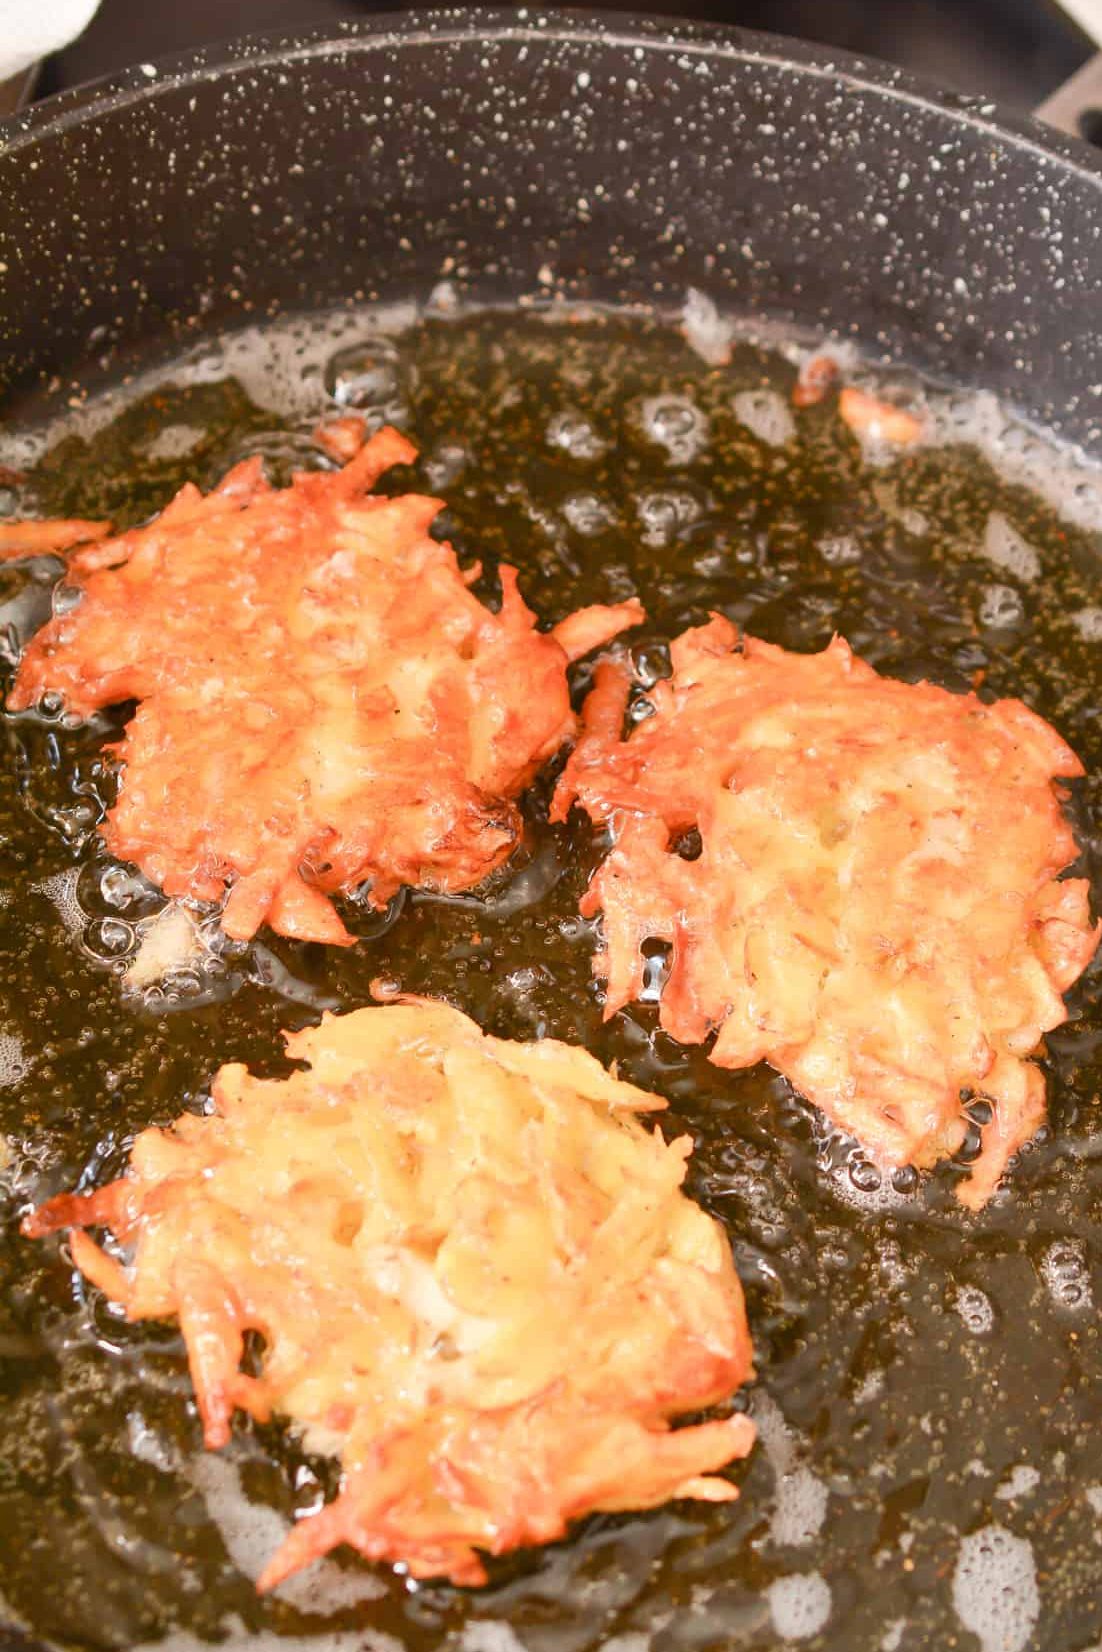 Add the potato mixture in small ¼ cup pancake shapes to the heated oil, and cook for a few minutes on each side until golden brown and crispy.